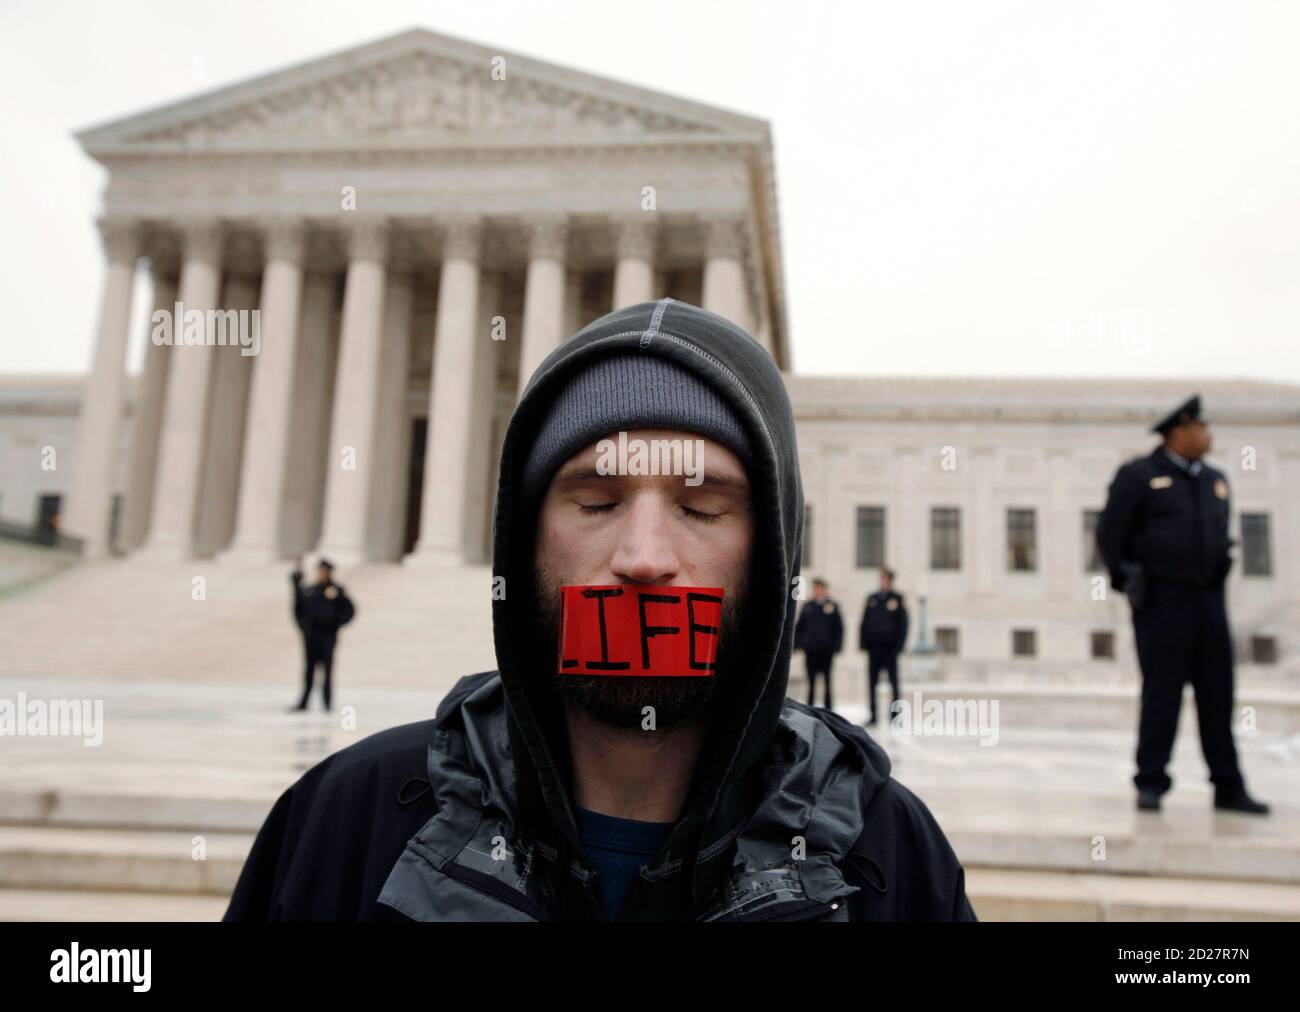 A pro-life demonstrator stands in front of the U.S. Supreme Court building during the 'March for Life', marking the 35th anniversary of the Supreme Court's 1973 decision in Roe vs Wade that made abortion legal, in Washington January 22, 2008.    REUTERS/Kevin Lamarque   (UNITED STATES) Stock Photo